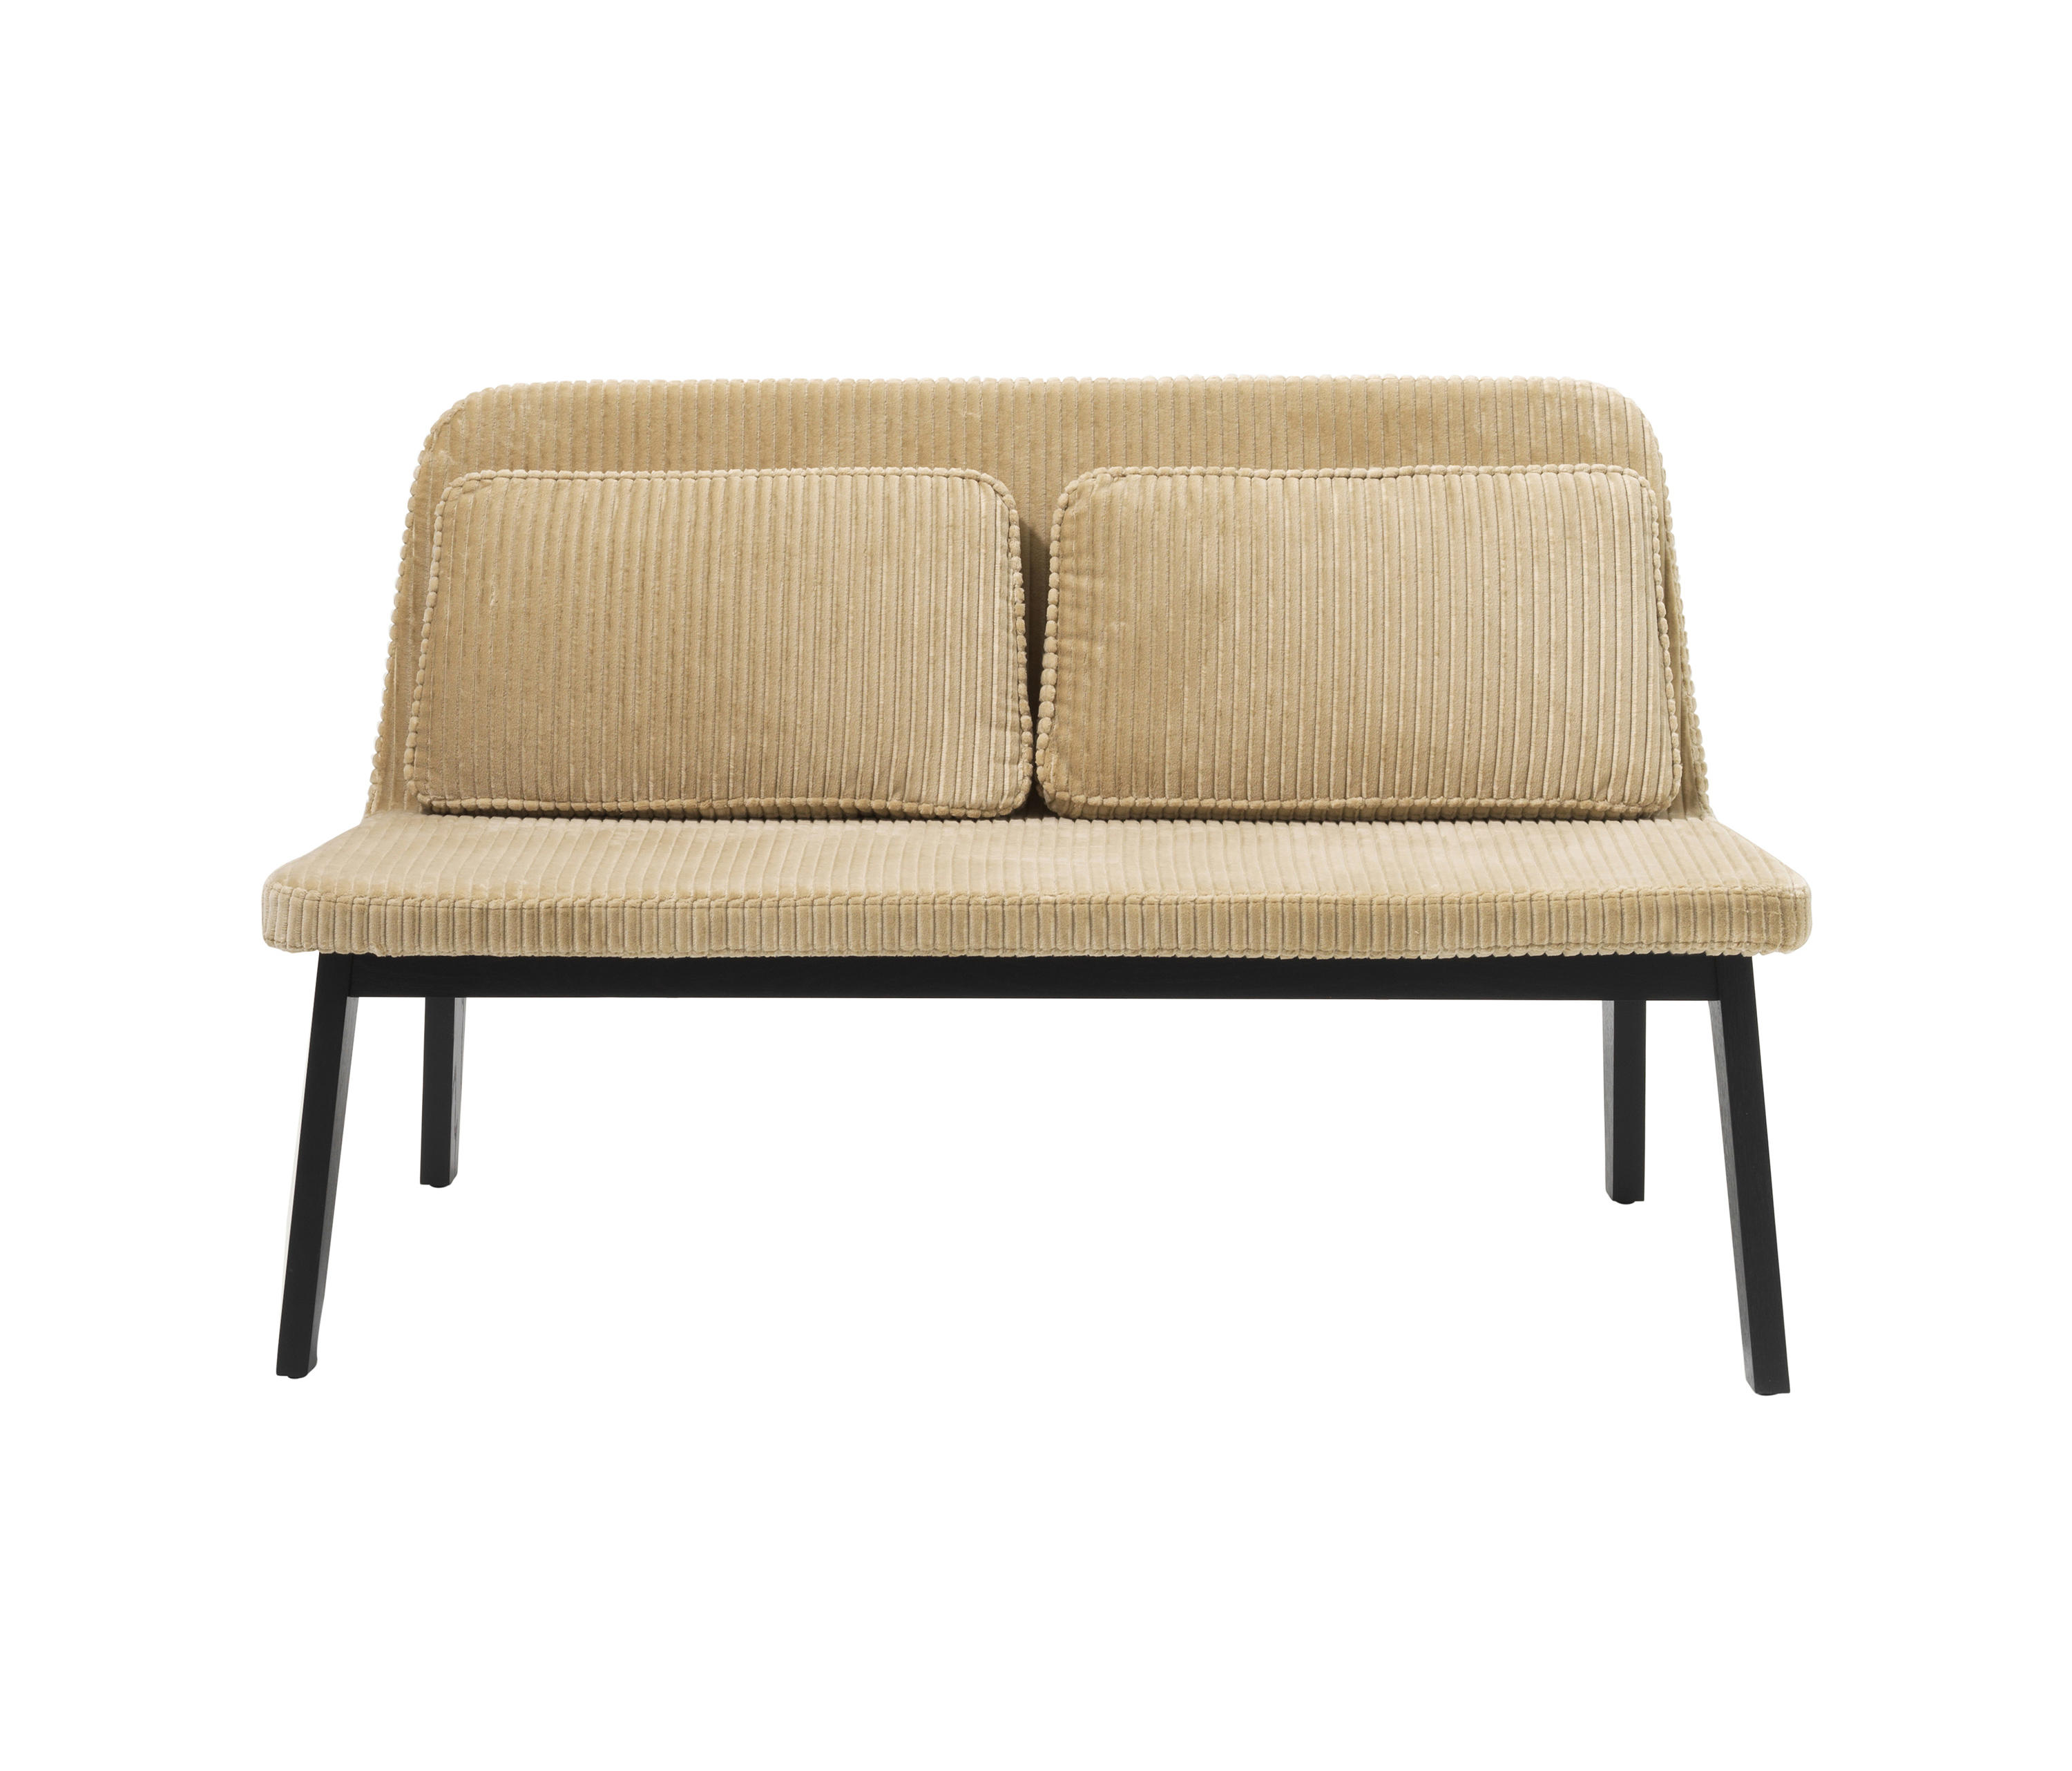 LEAN 2-SEATER - Benches from møbel copenhagen | Architonic